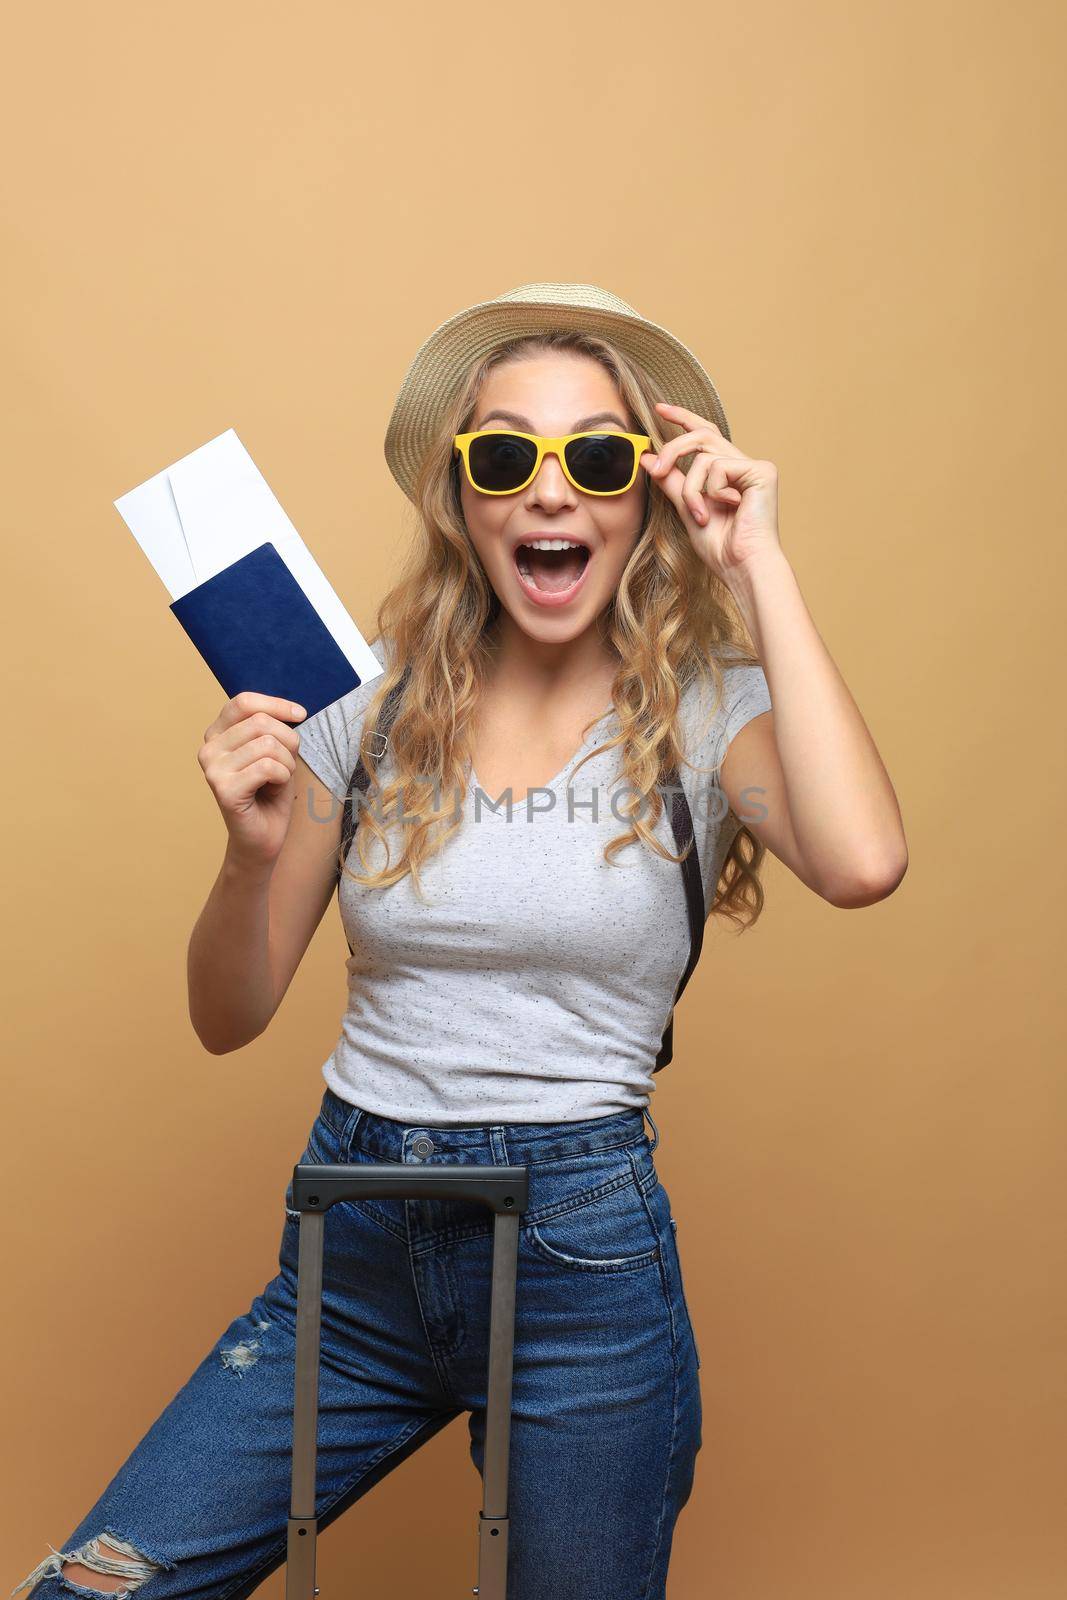 Cheerful blonde woman posing with baggage and holding passport with tickets while looking away over beige background. by tsyhun